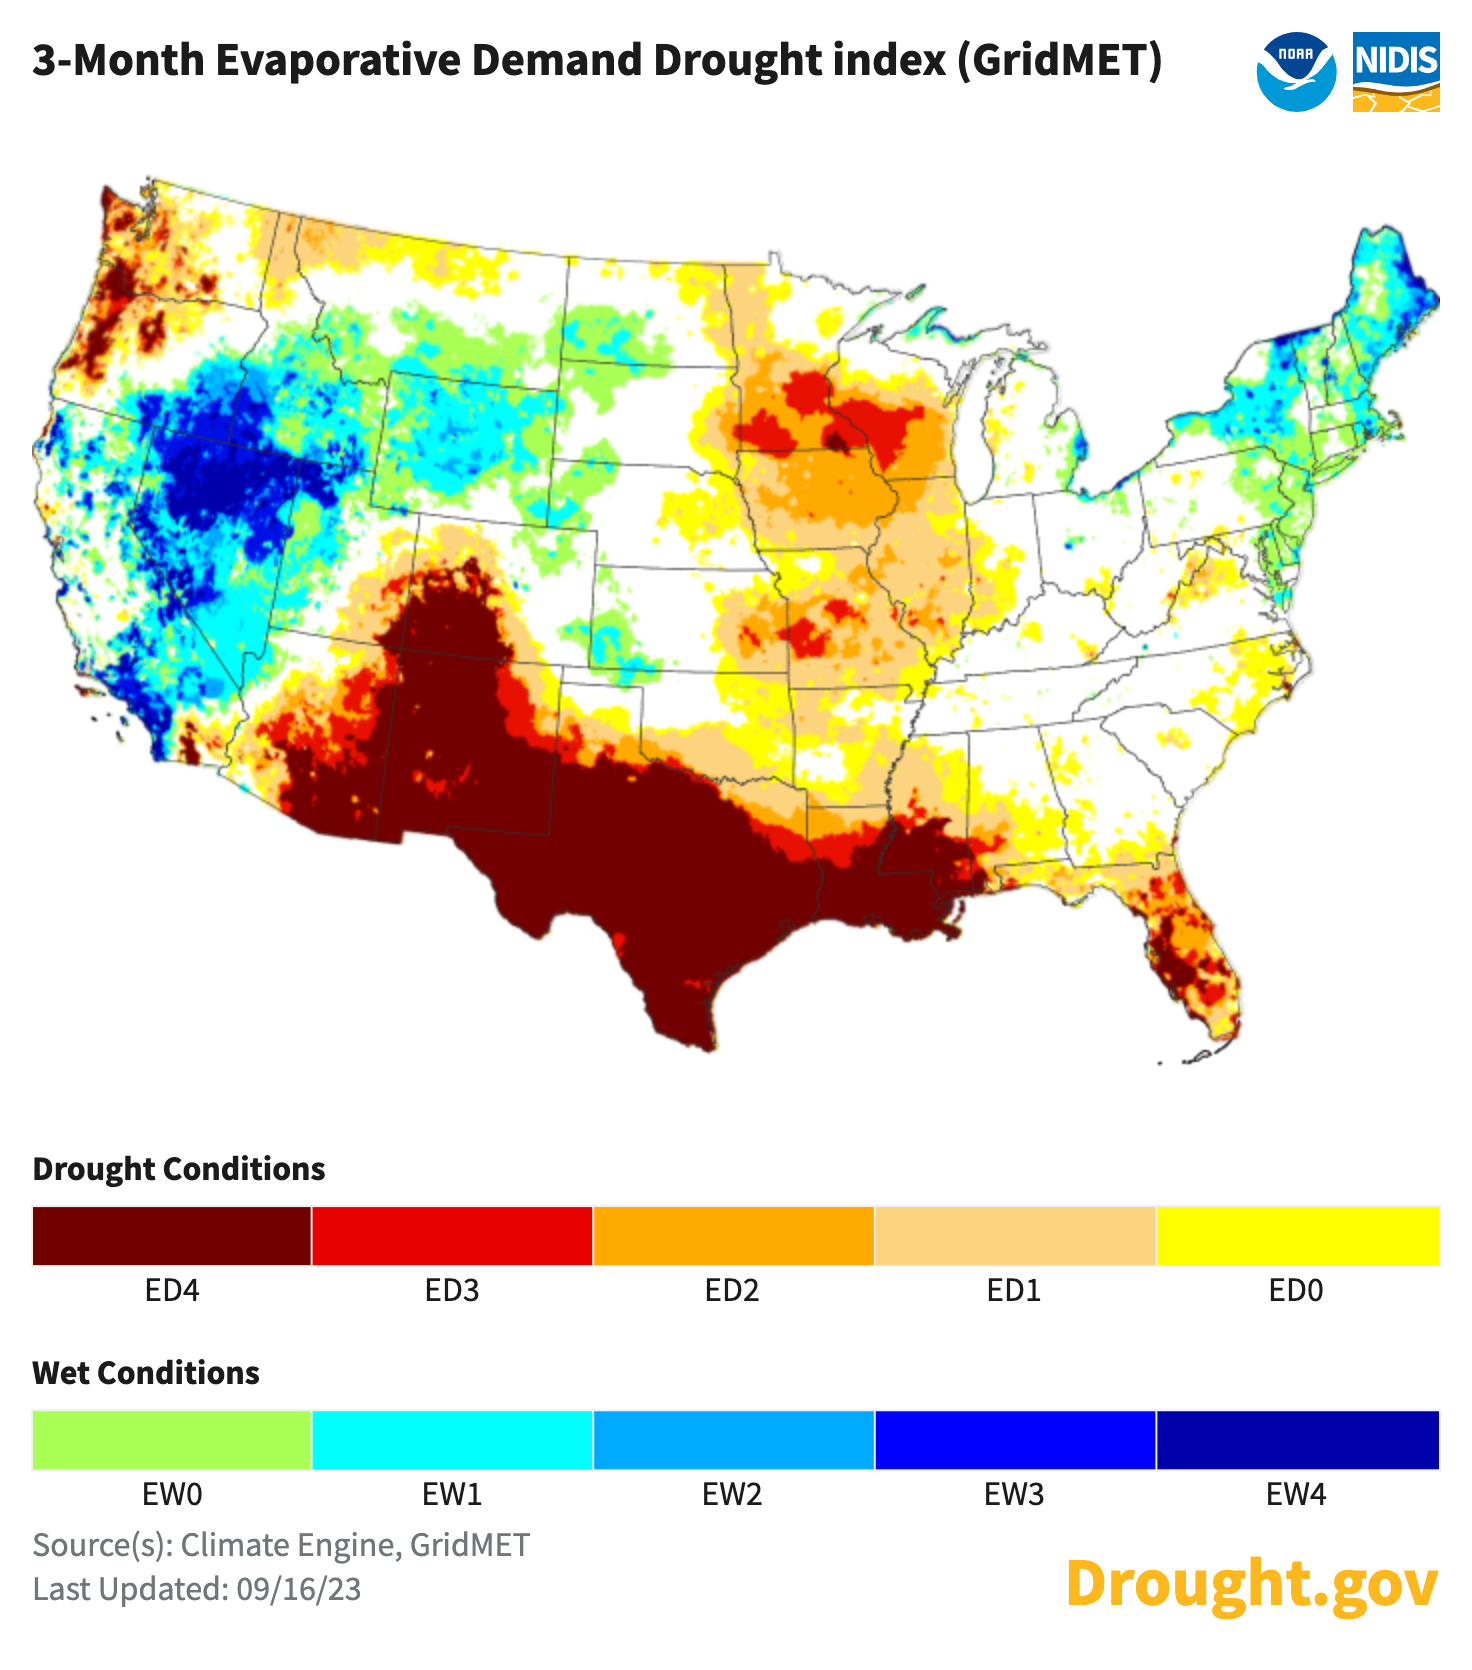 The map shows the 90-day Evaporative Demand Drought Index, updated on September 16, 2023.